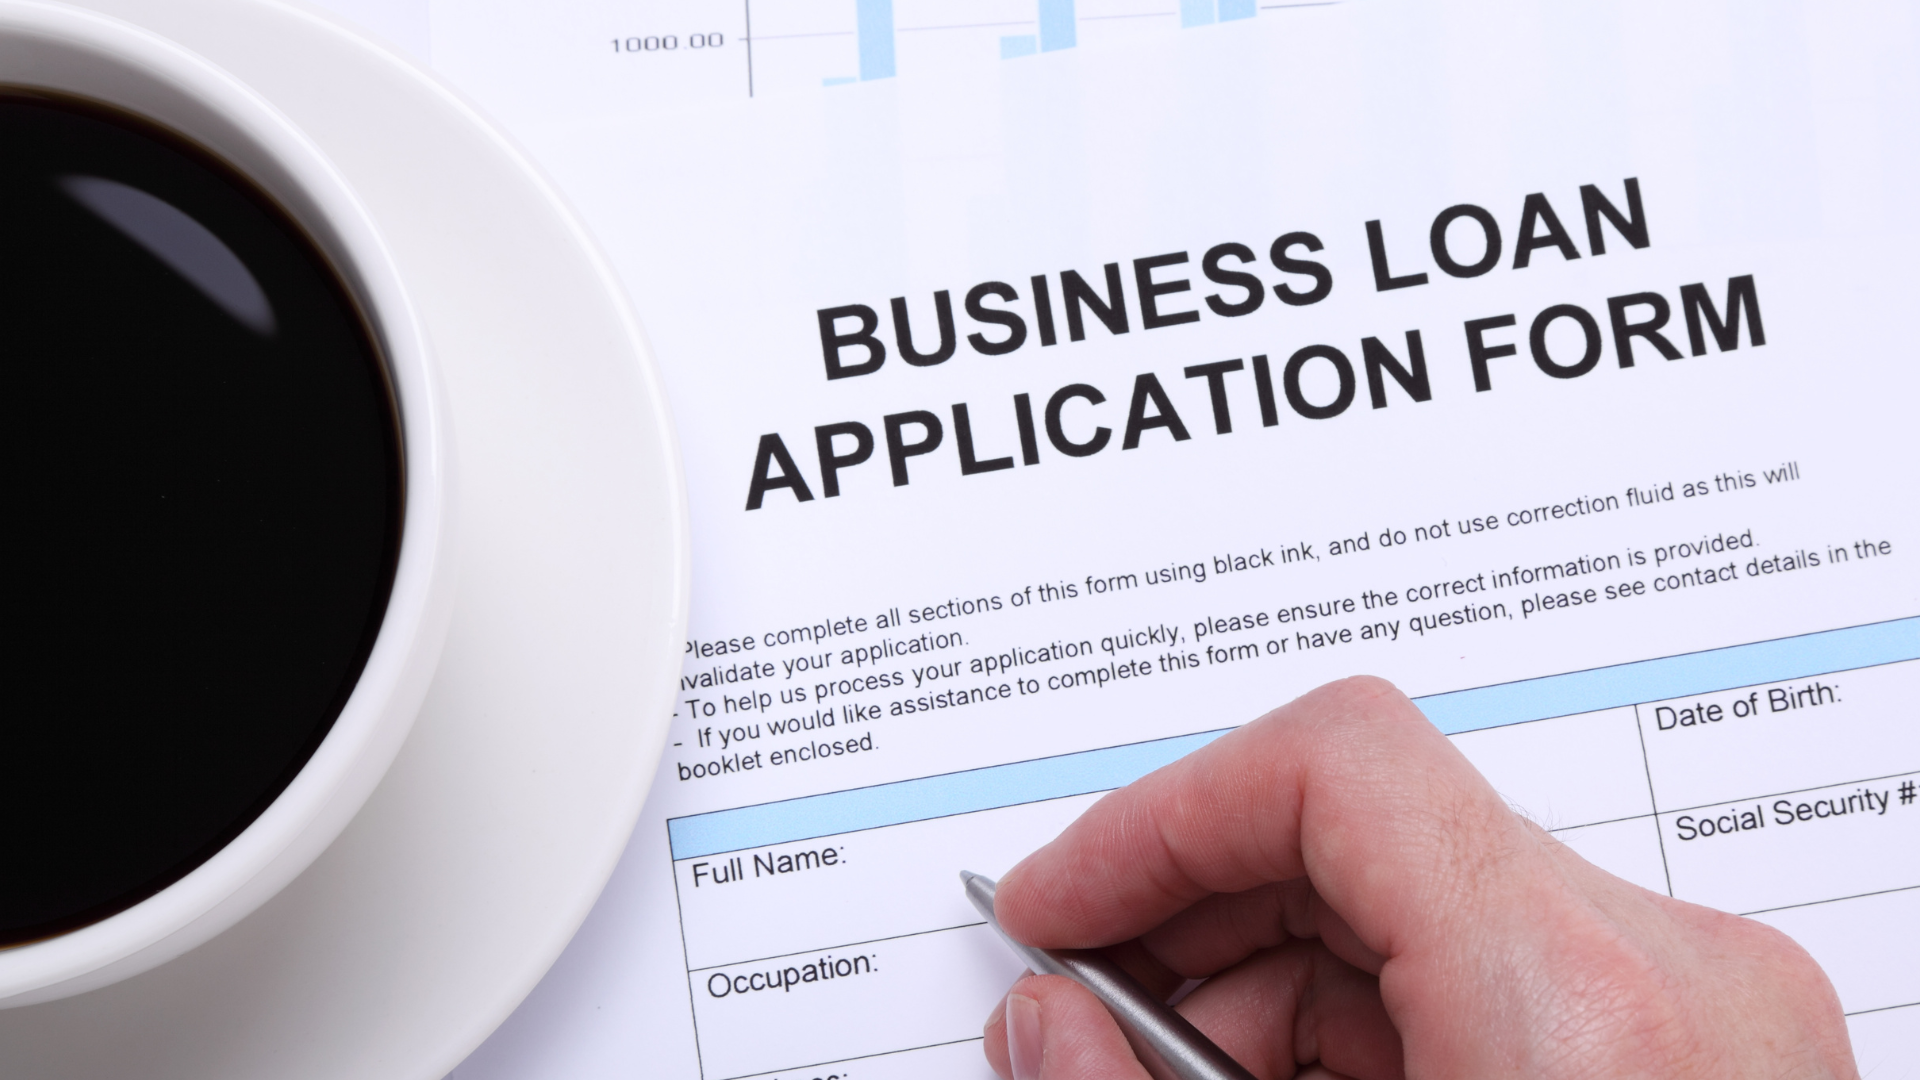 What type of business loan